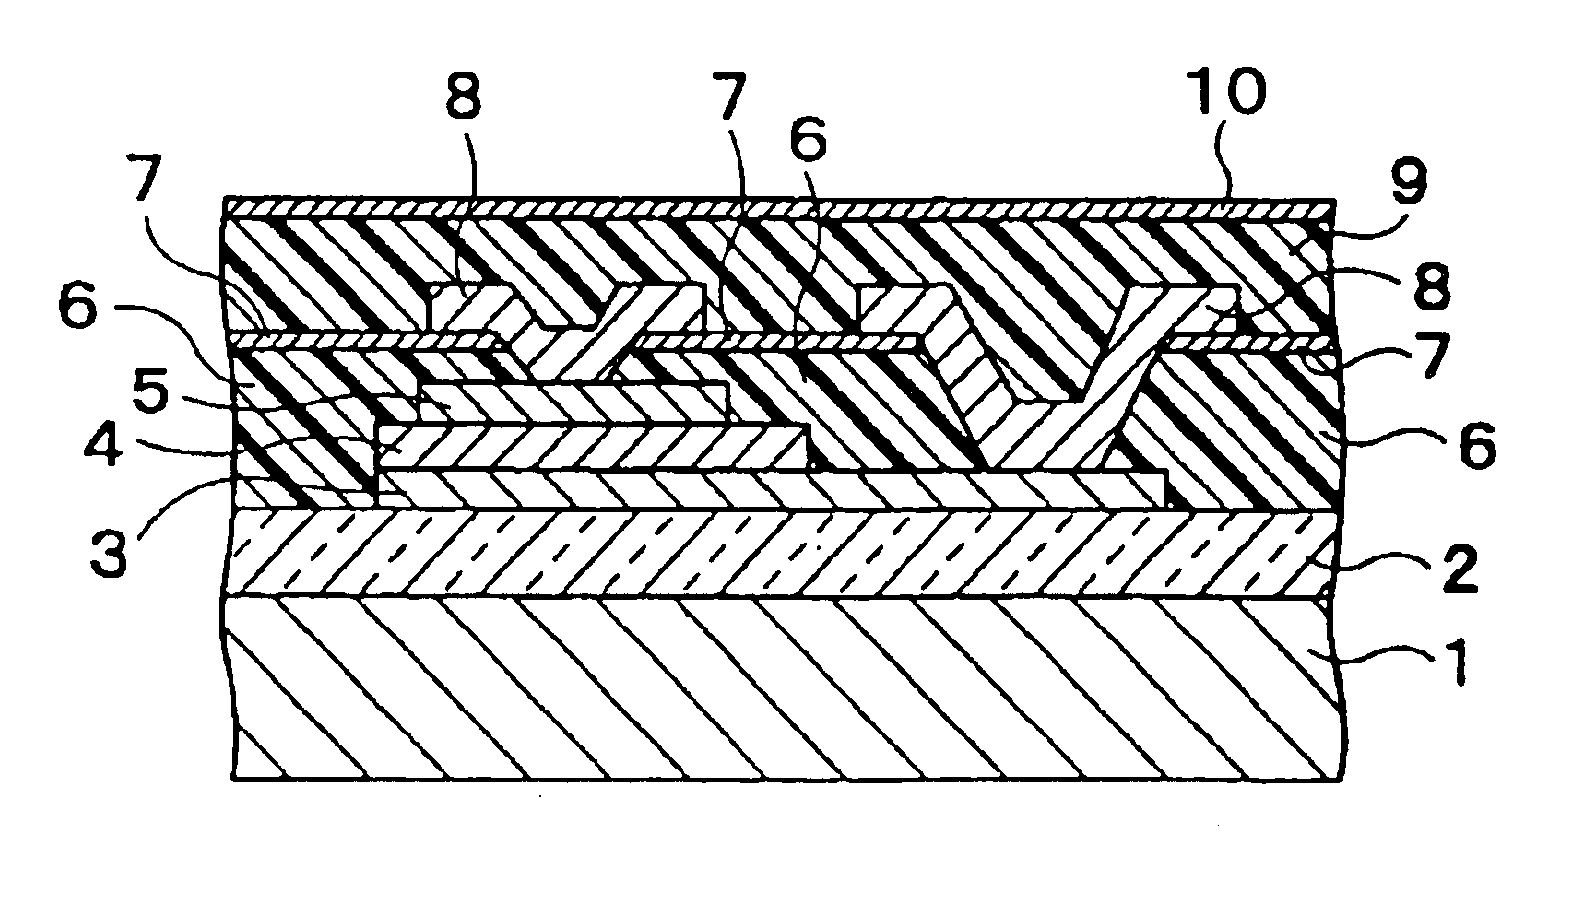 Semiconductor memory device and manufacturing process for the same